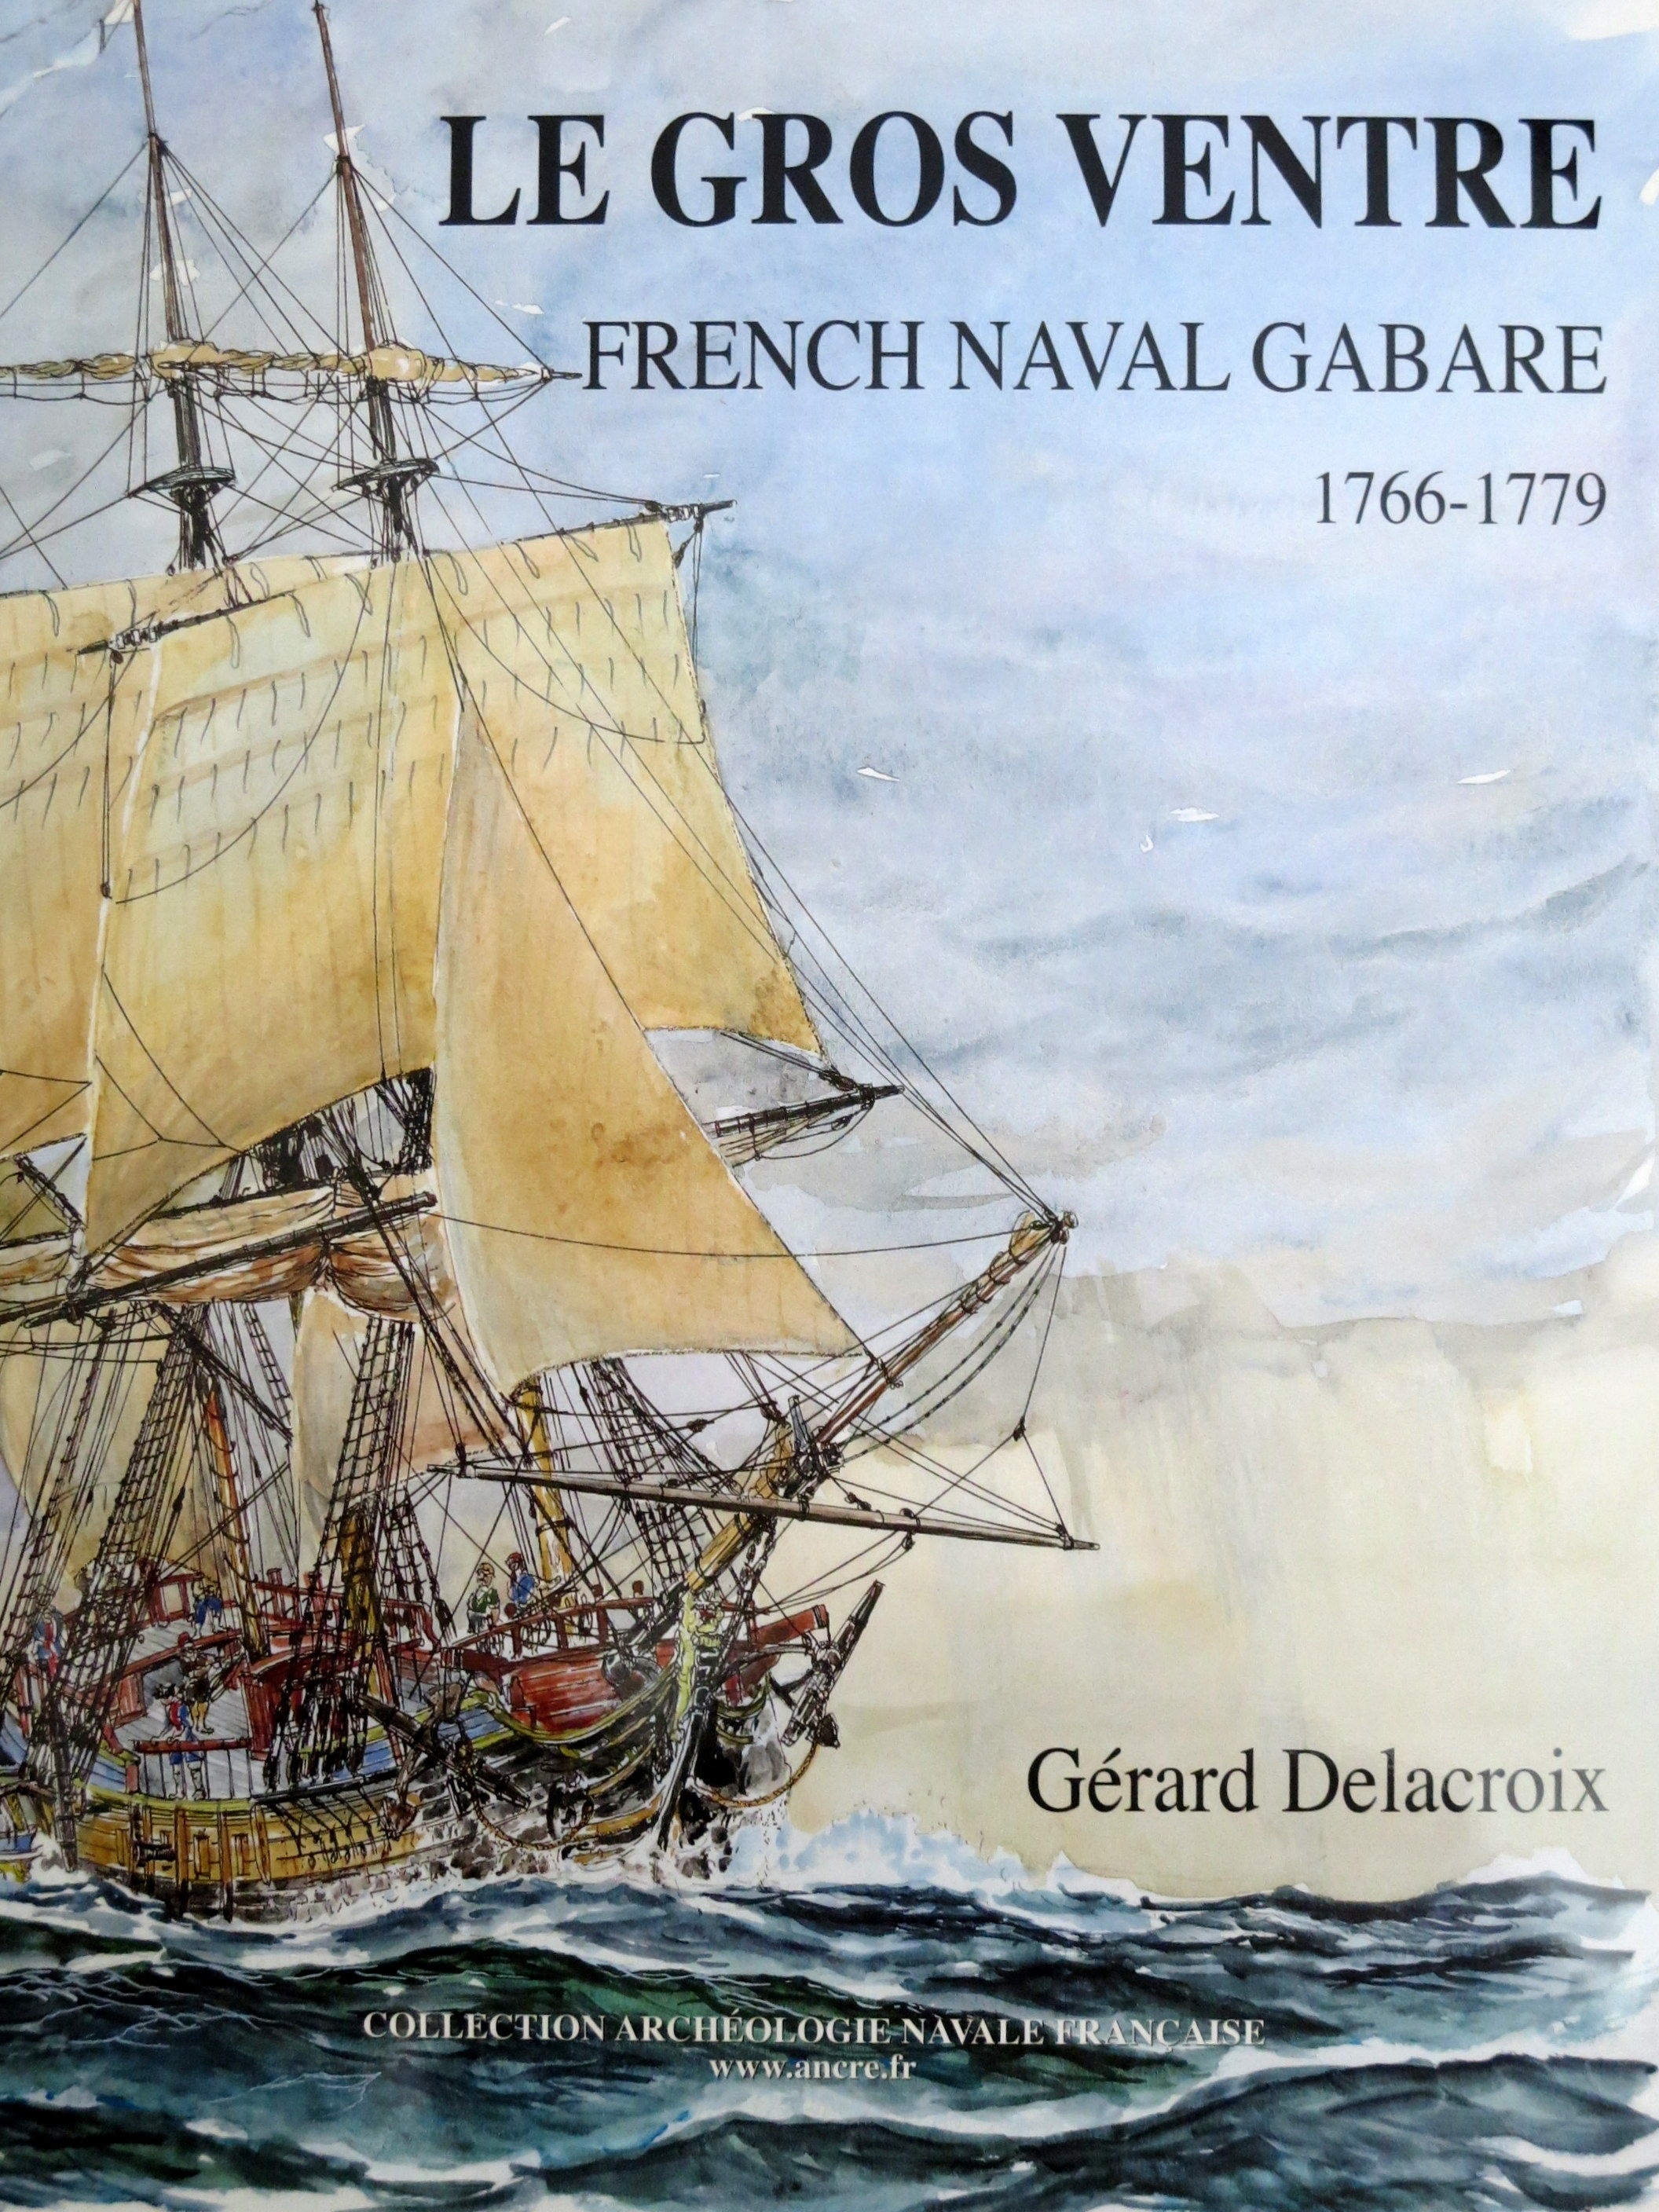 Le Gros Ventre. French naval gabare 1766-1779